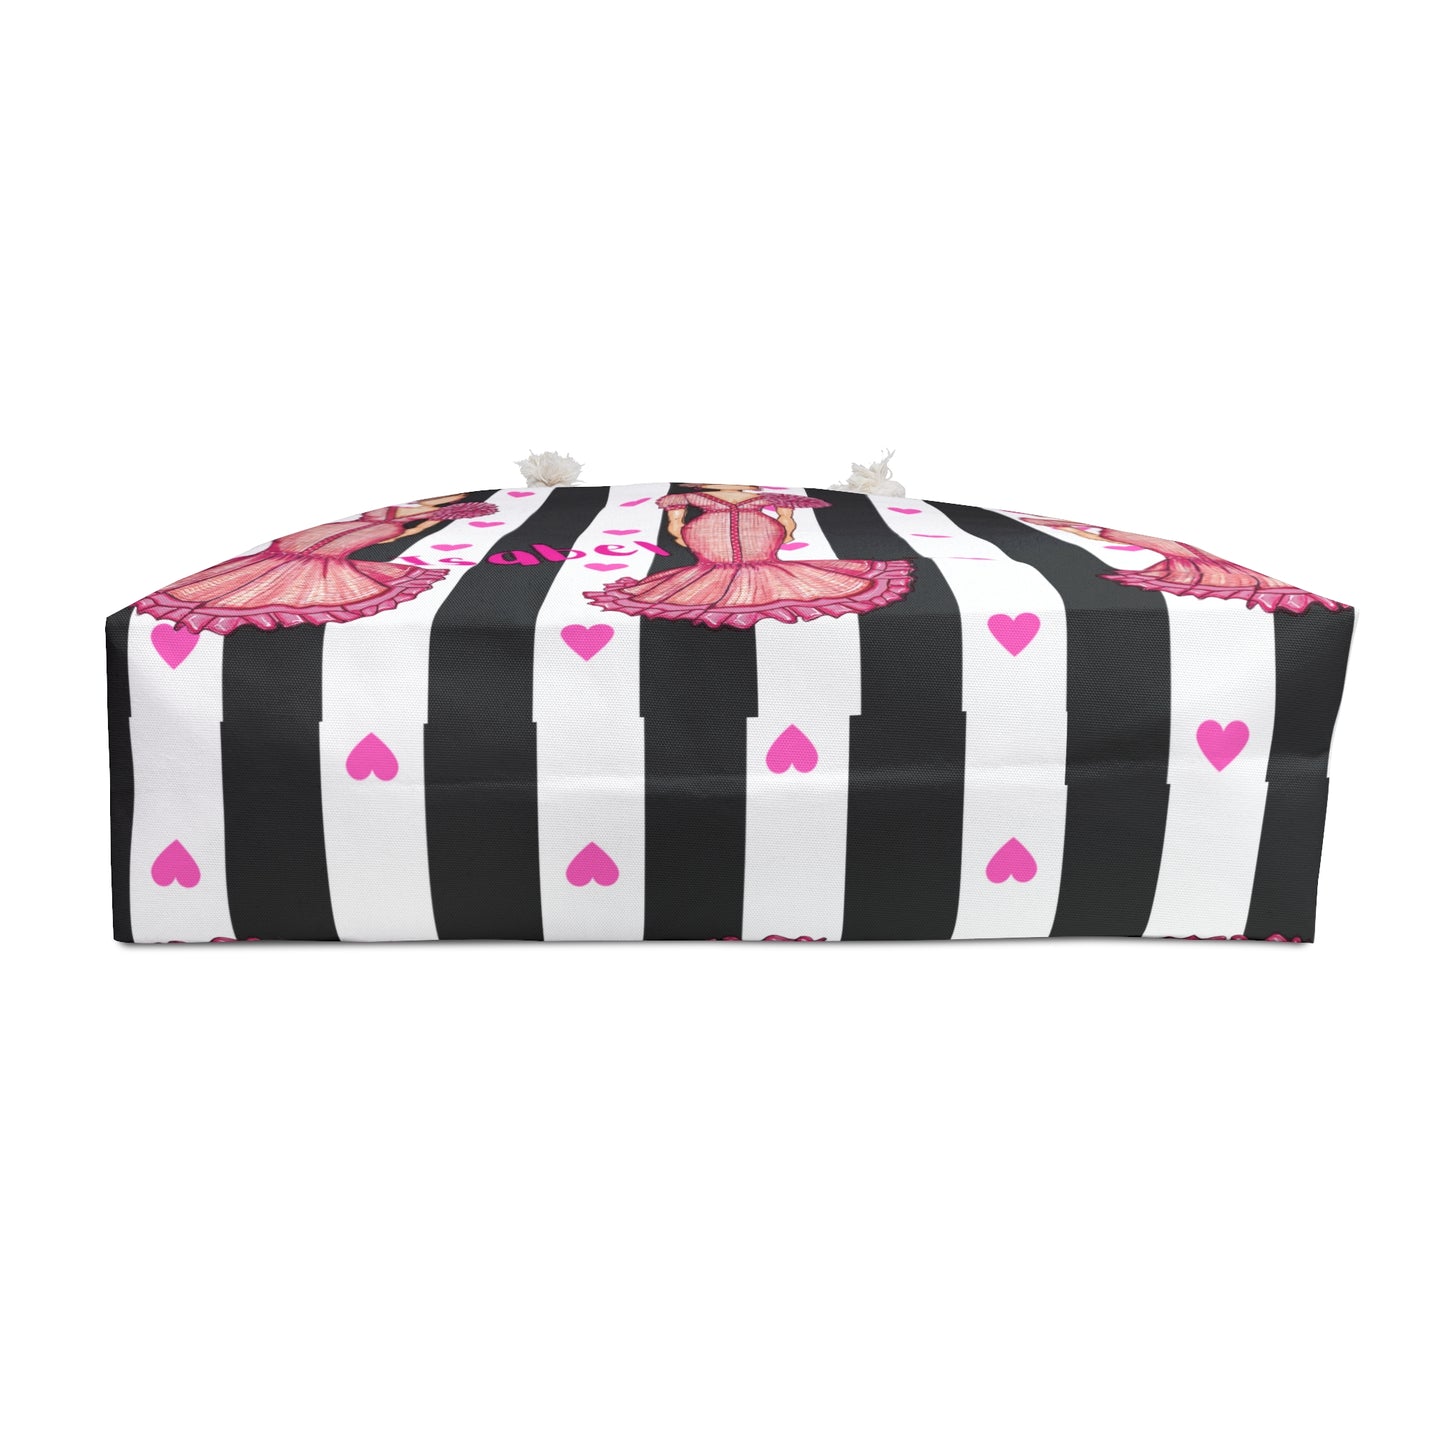 a black and white striped bag with pink butterflies on it